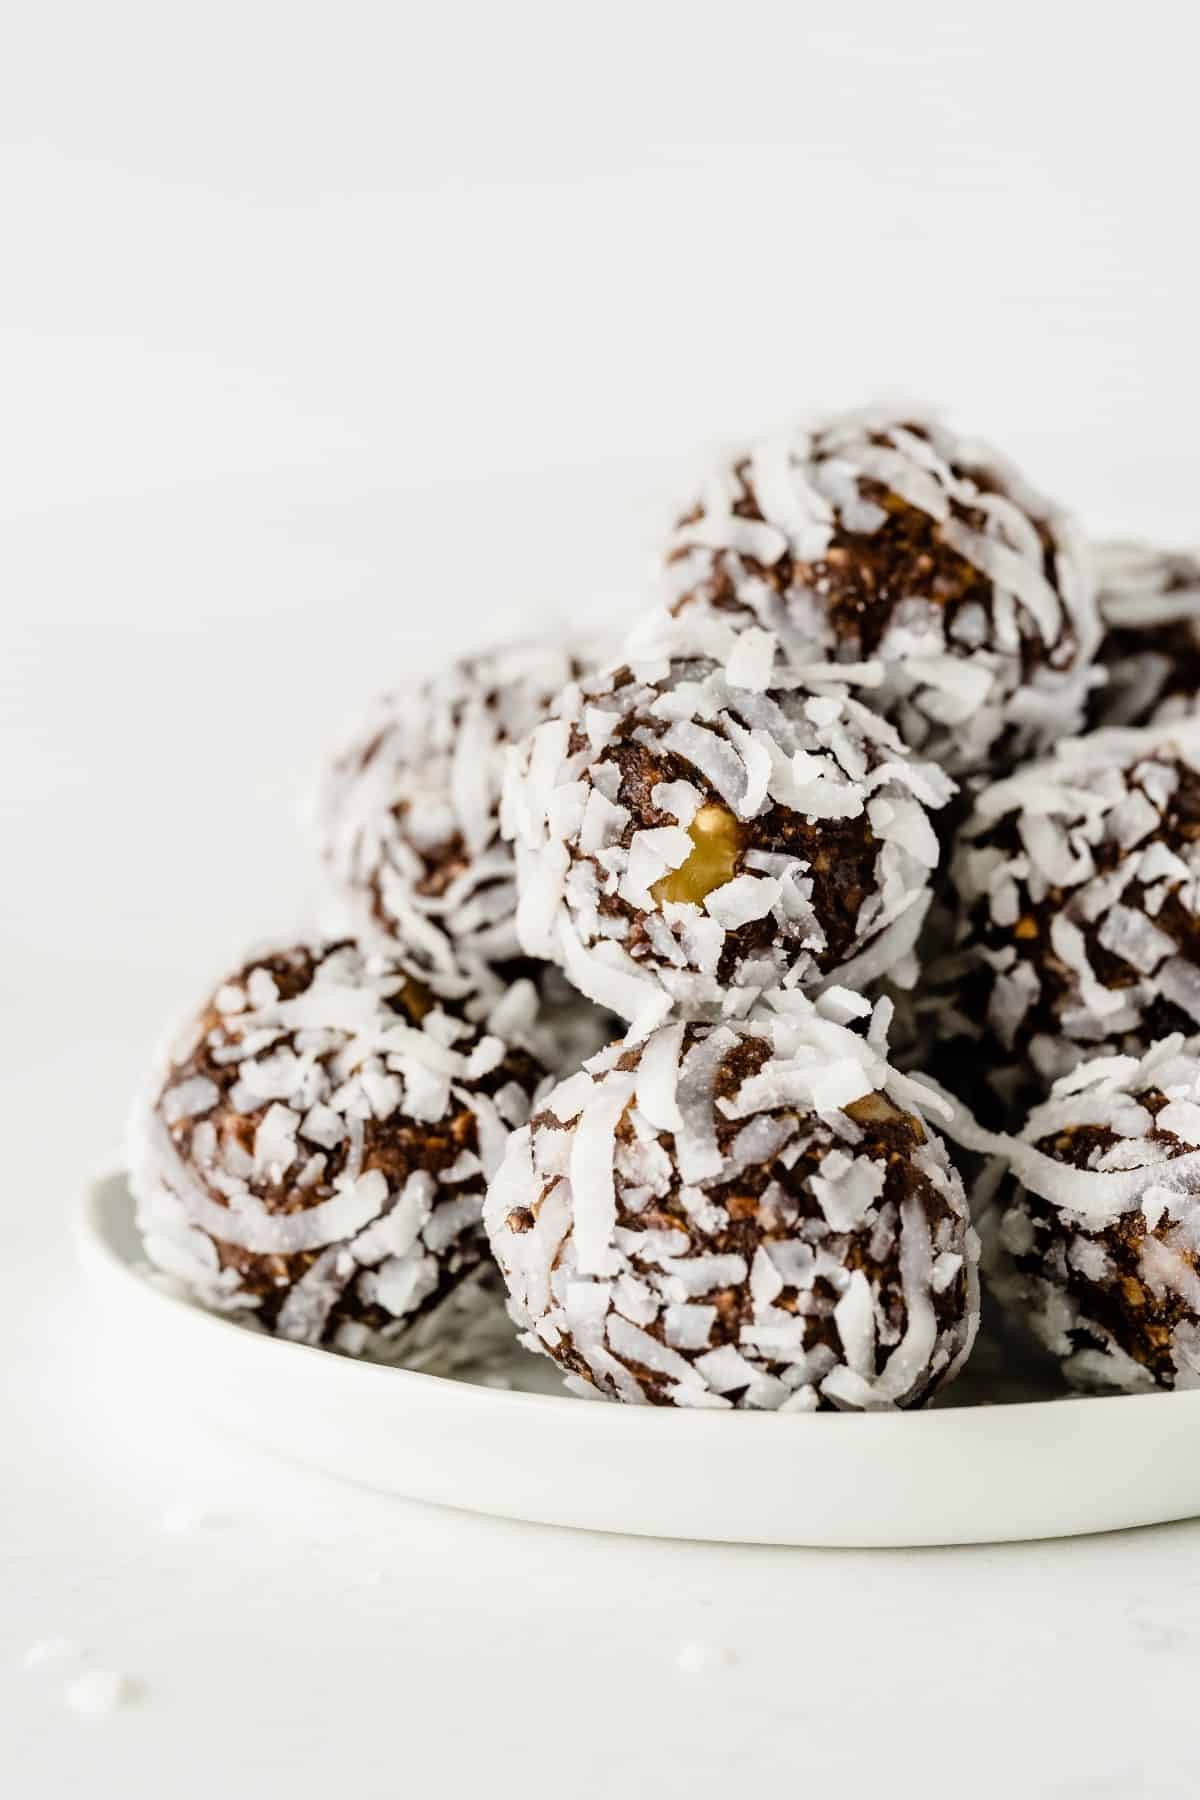 A close-up of chocolate date balls covered in coconut and stacked on a white plate against all white.